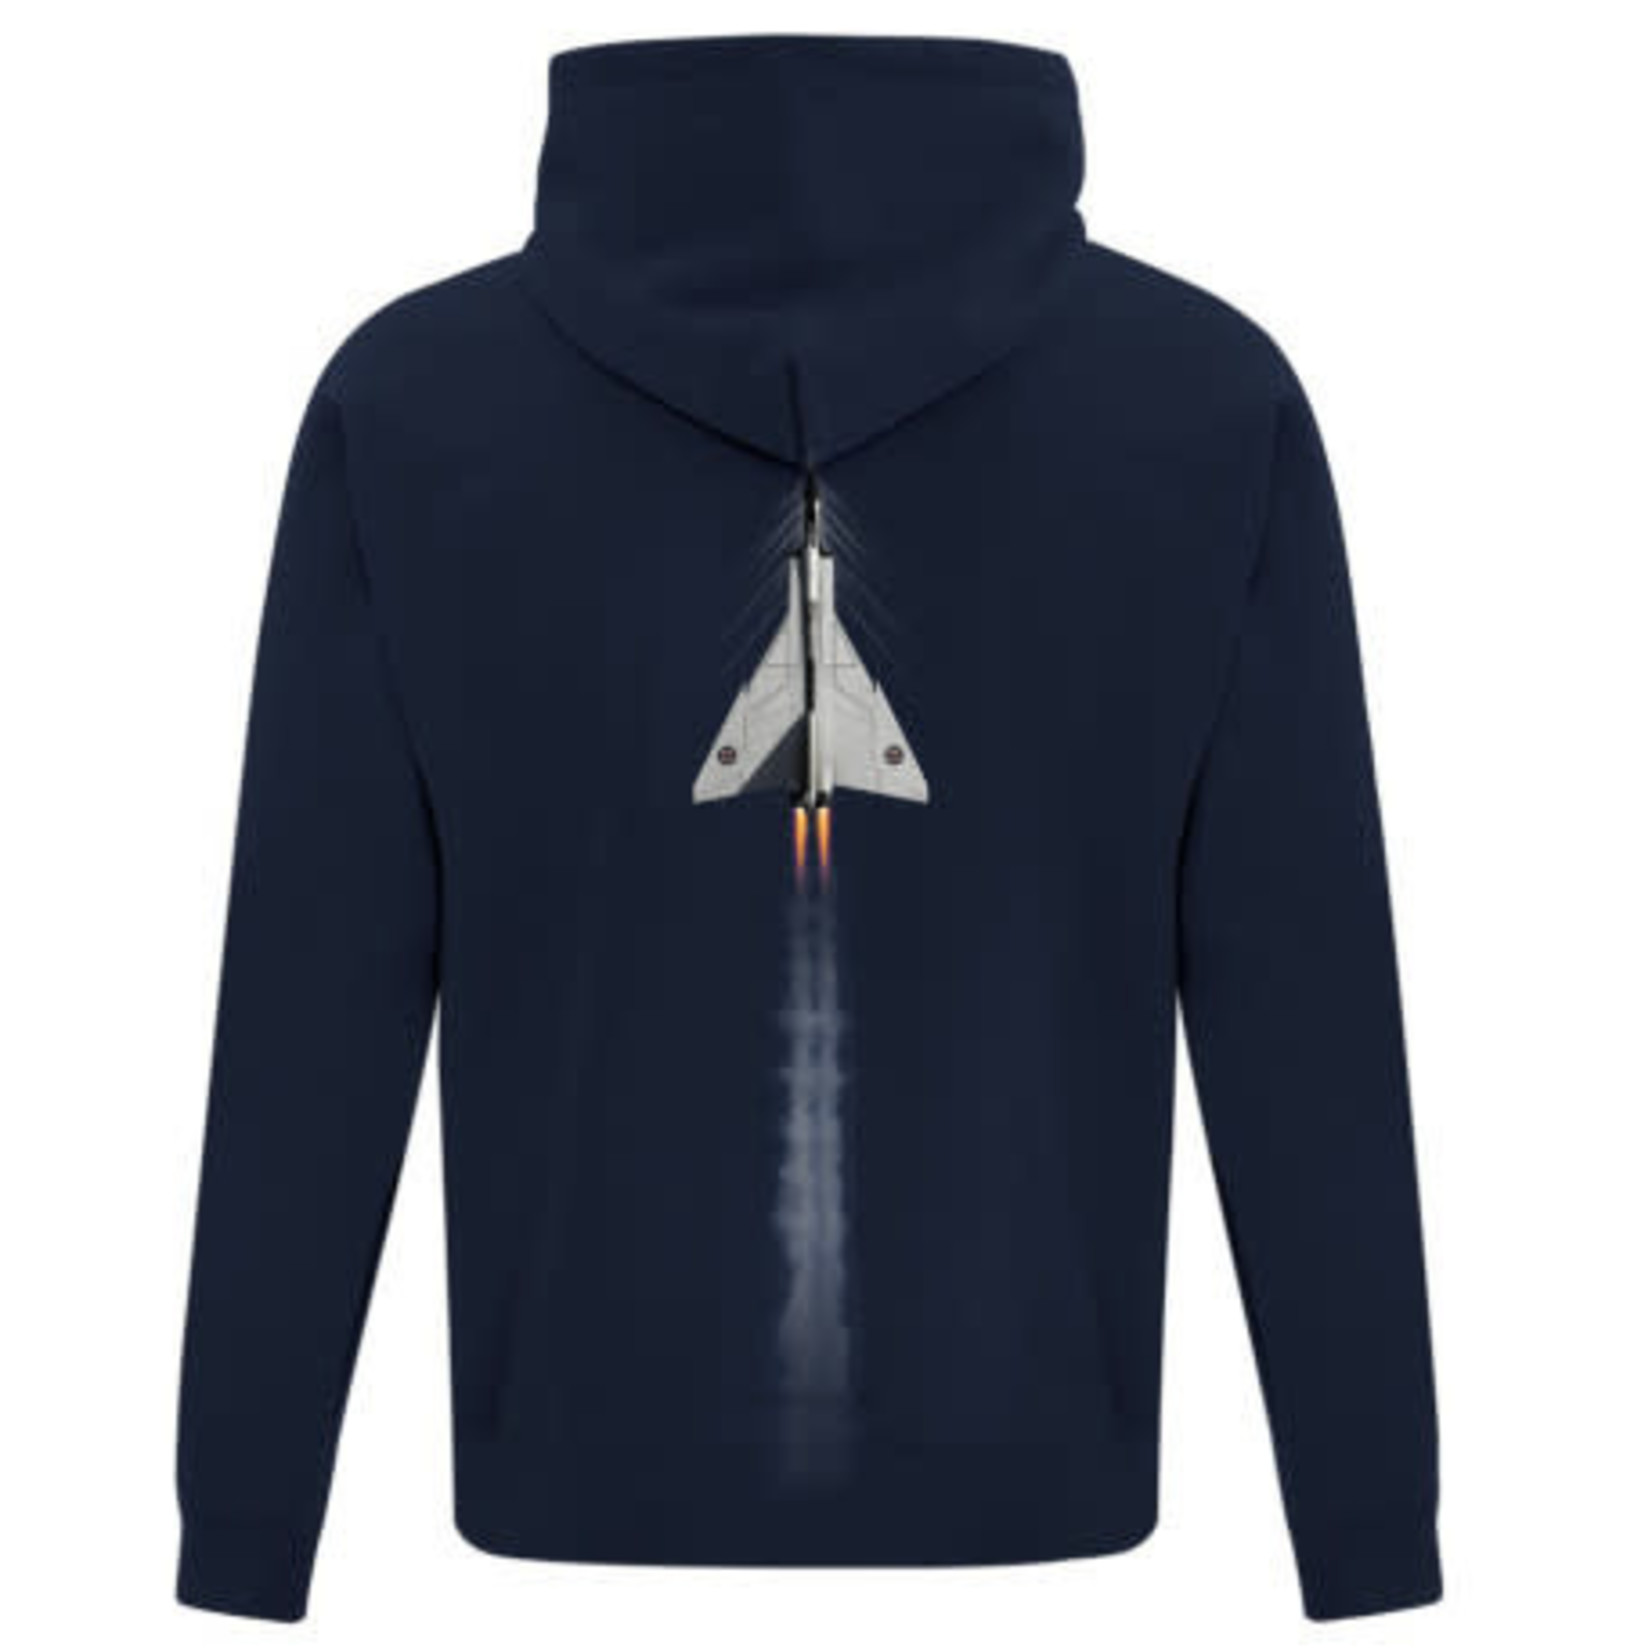 Aviation and Space Avro Arrow Hoodie Small